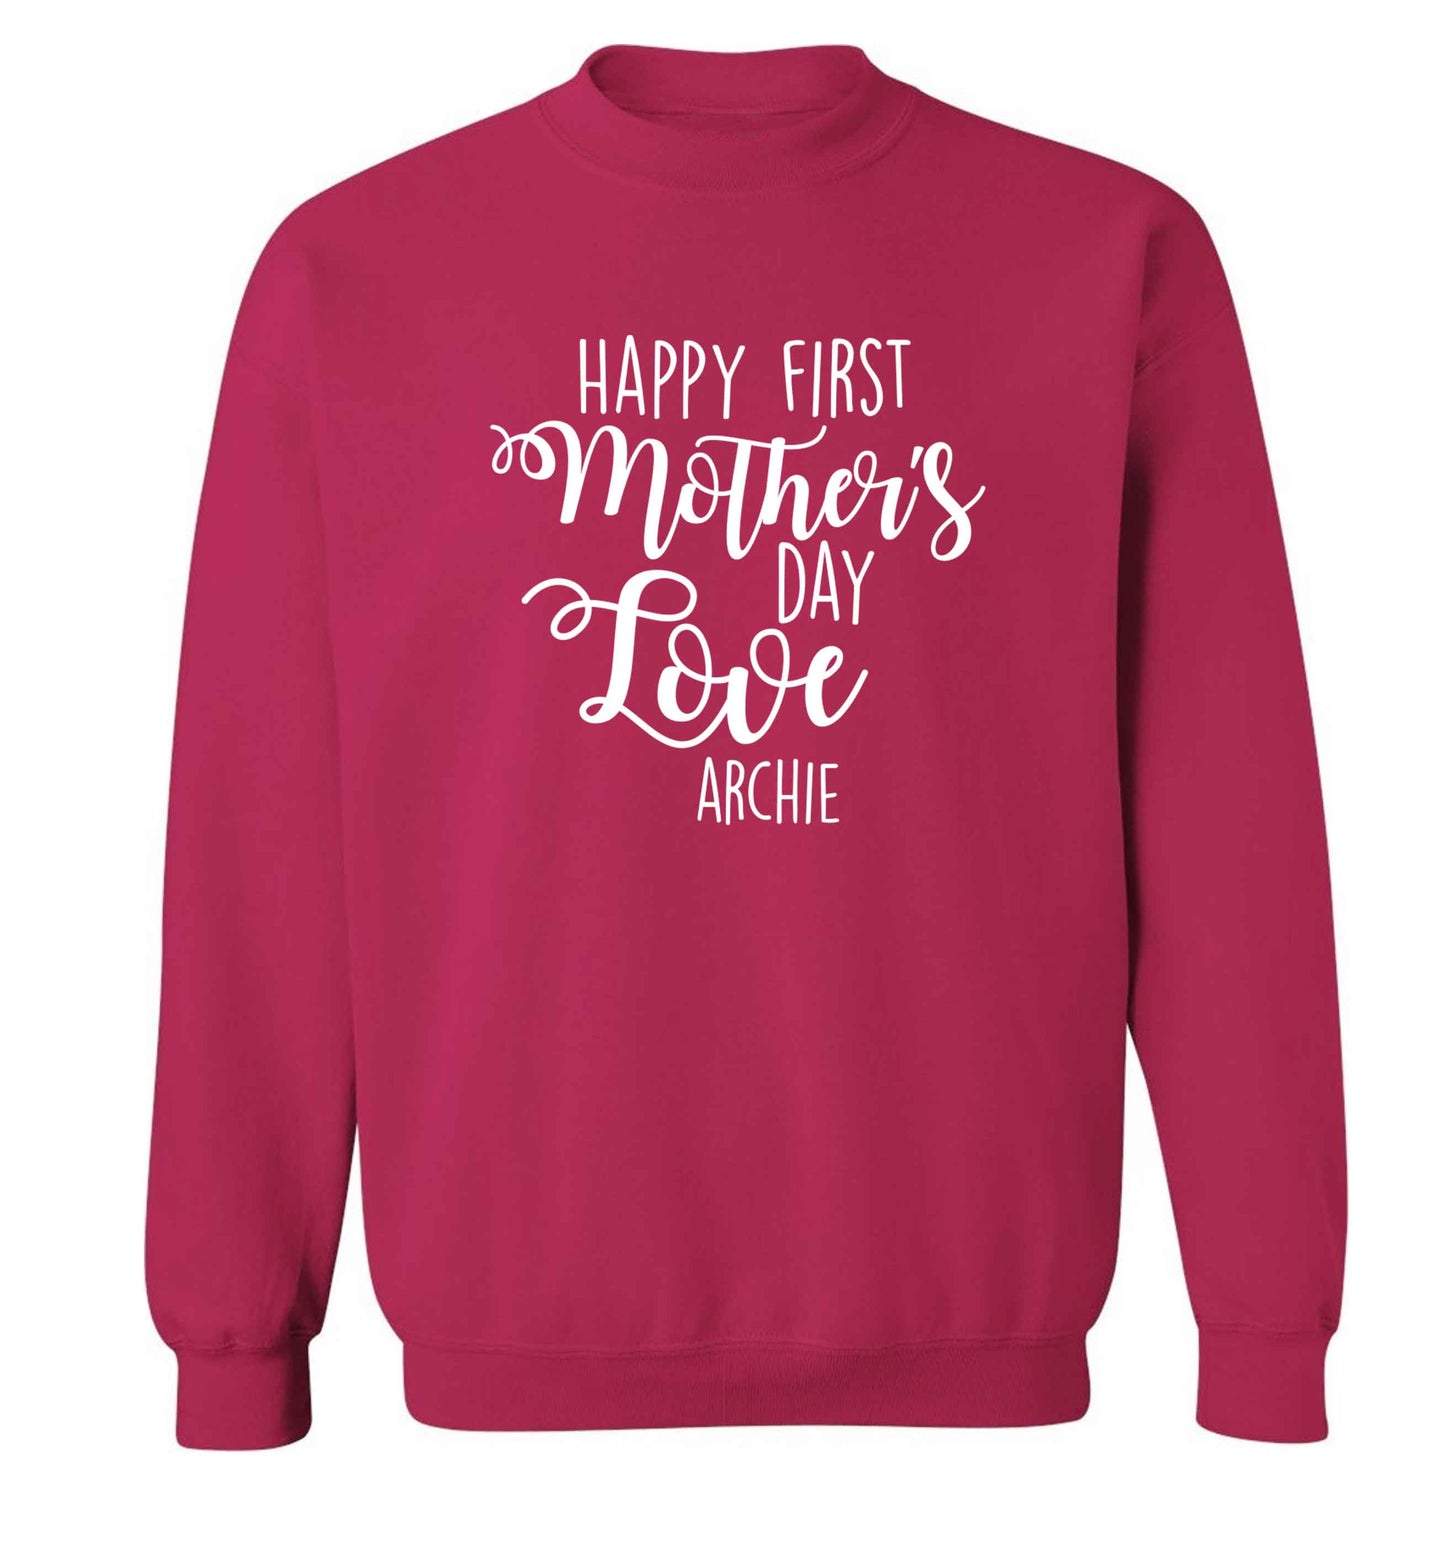 Personalised happy first mother's day love adult's unisex pink sweater 2XL